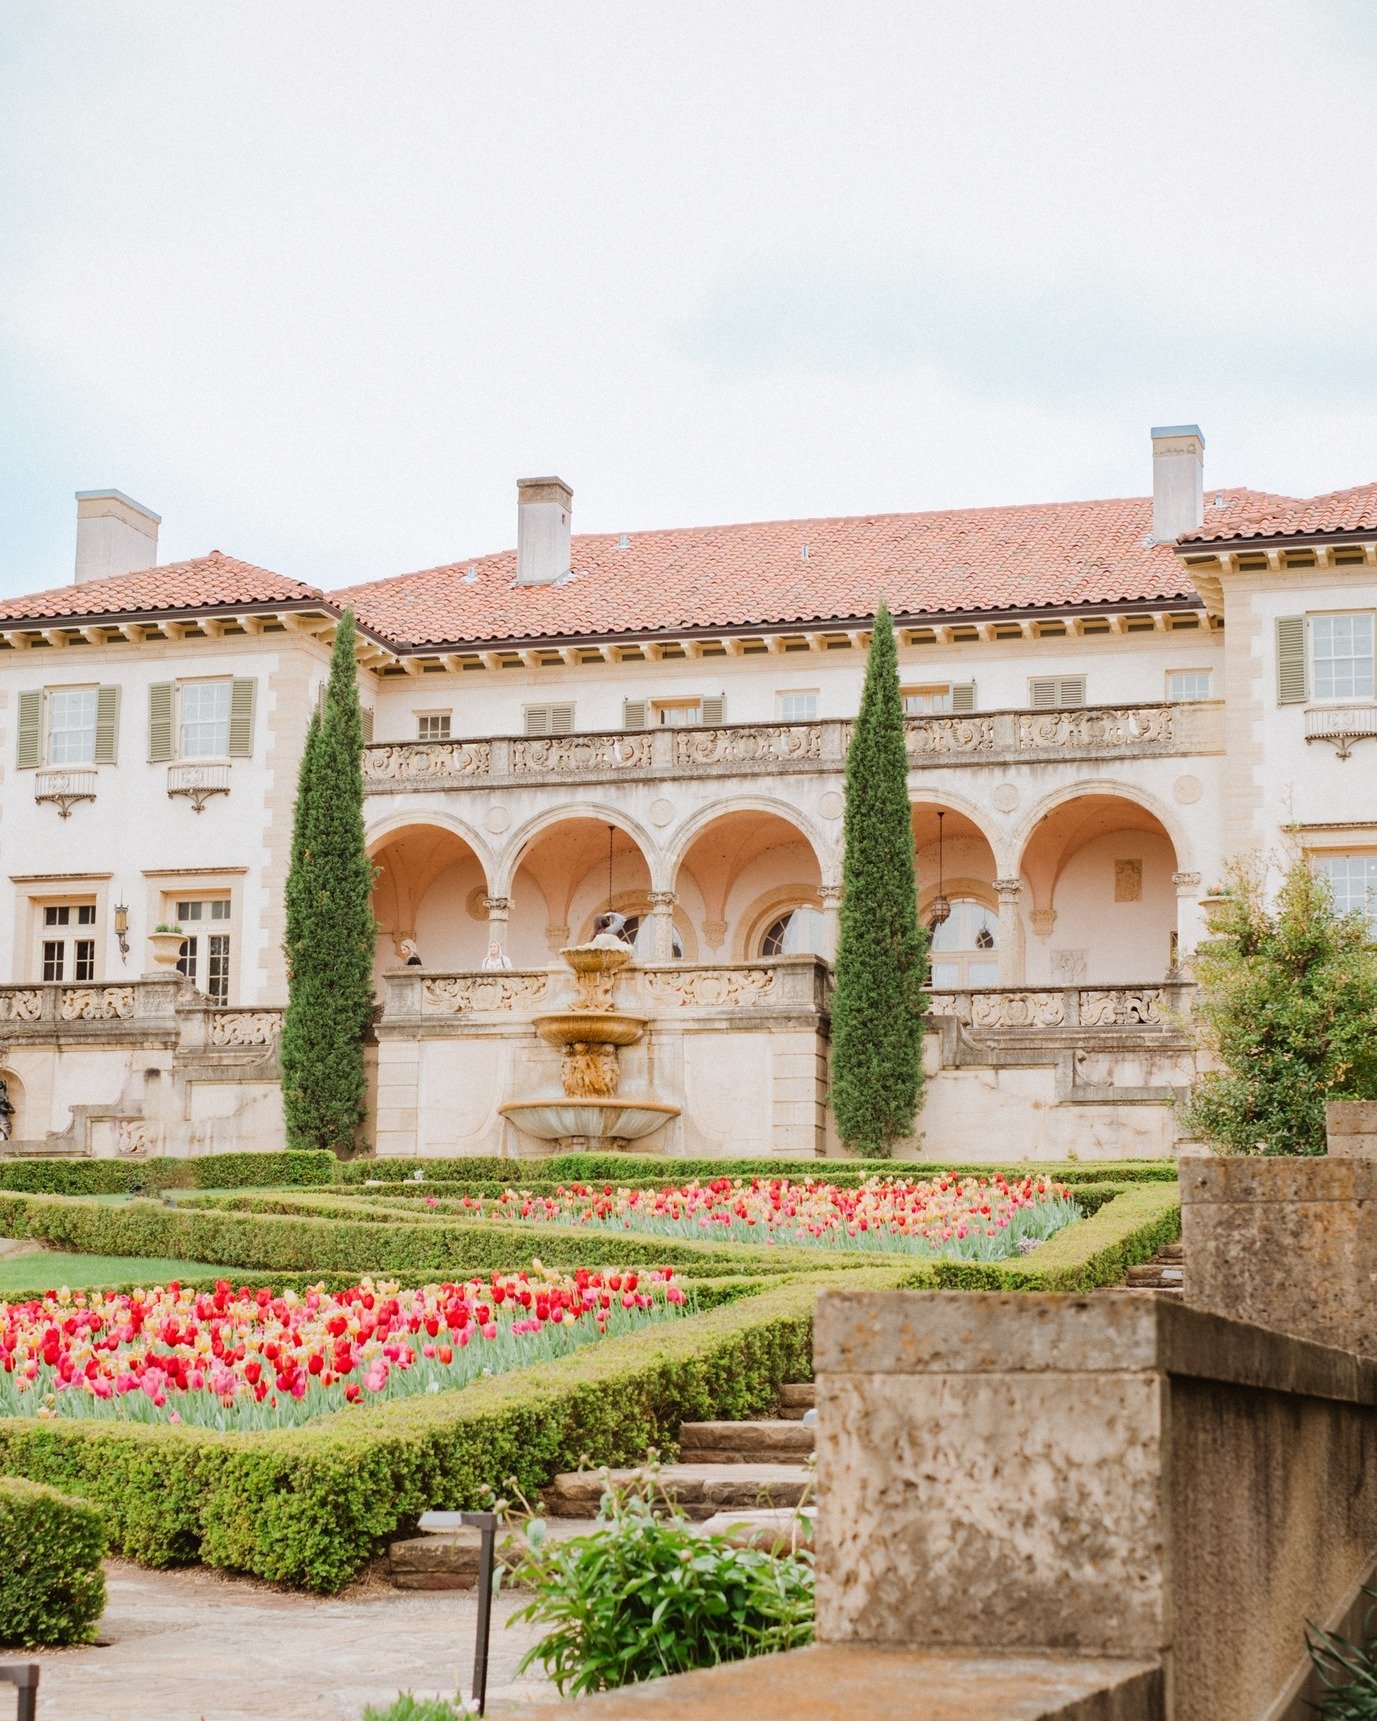 For those that need bold color, texture and patterns for their day... eat your heart out!

Philbrook Museum | Destination Wedding Photographer &amp; Videographer | Midwest Luxury Weddings | Iconic Wedding Venues | Maximalist Wedding Inspiration

Wedd